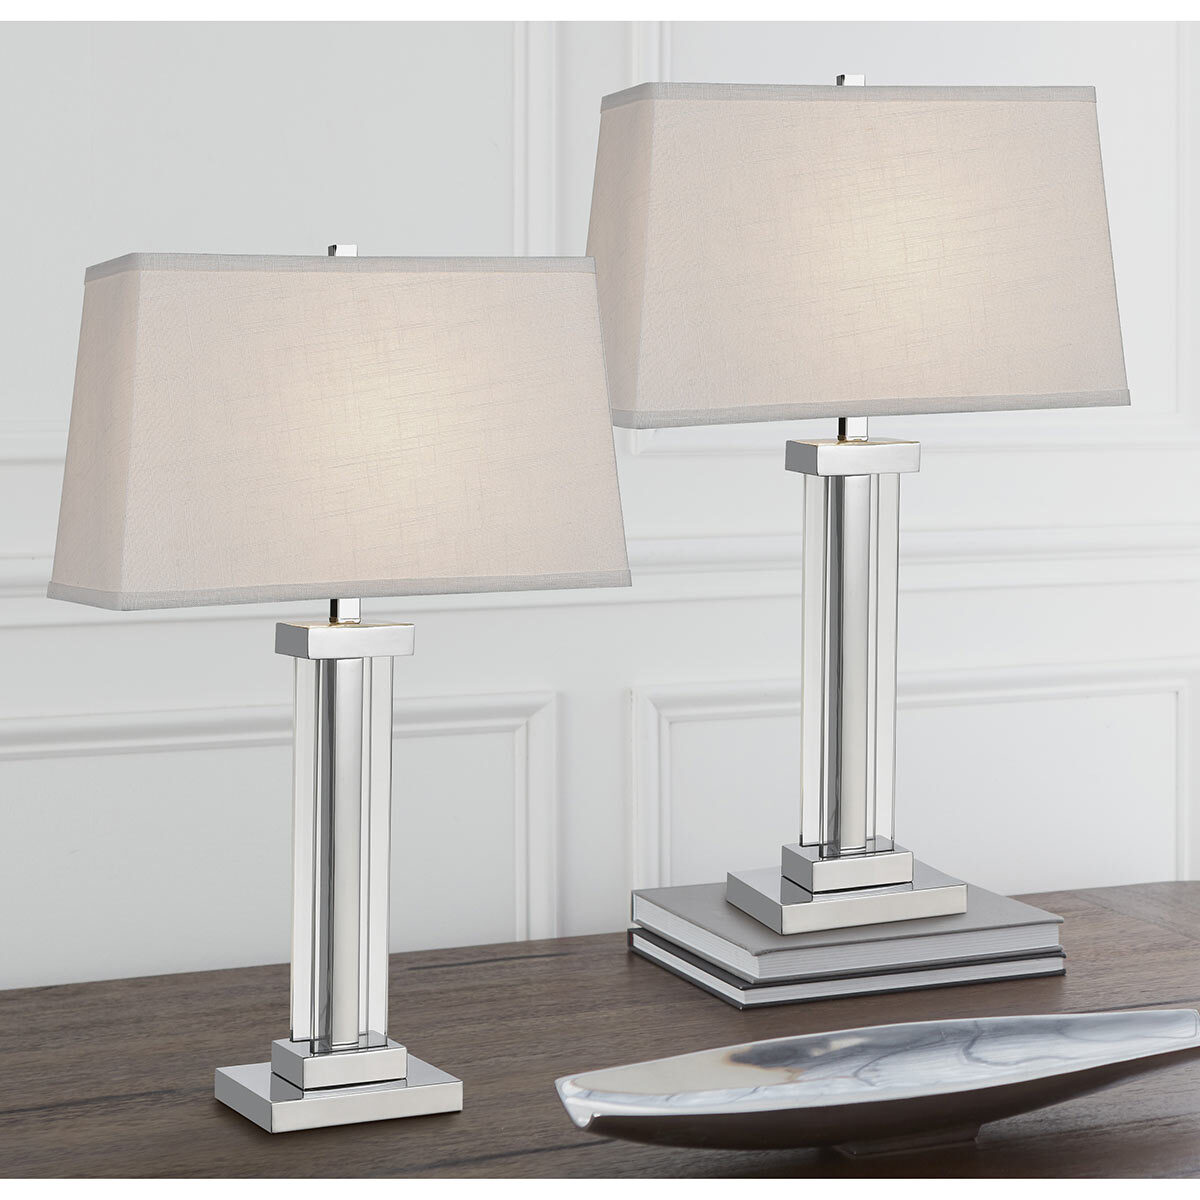 Kate Crystal Table Lamps 2 Pack, Set Of 2 Quad Stacked Crystal Table Lamps Costco